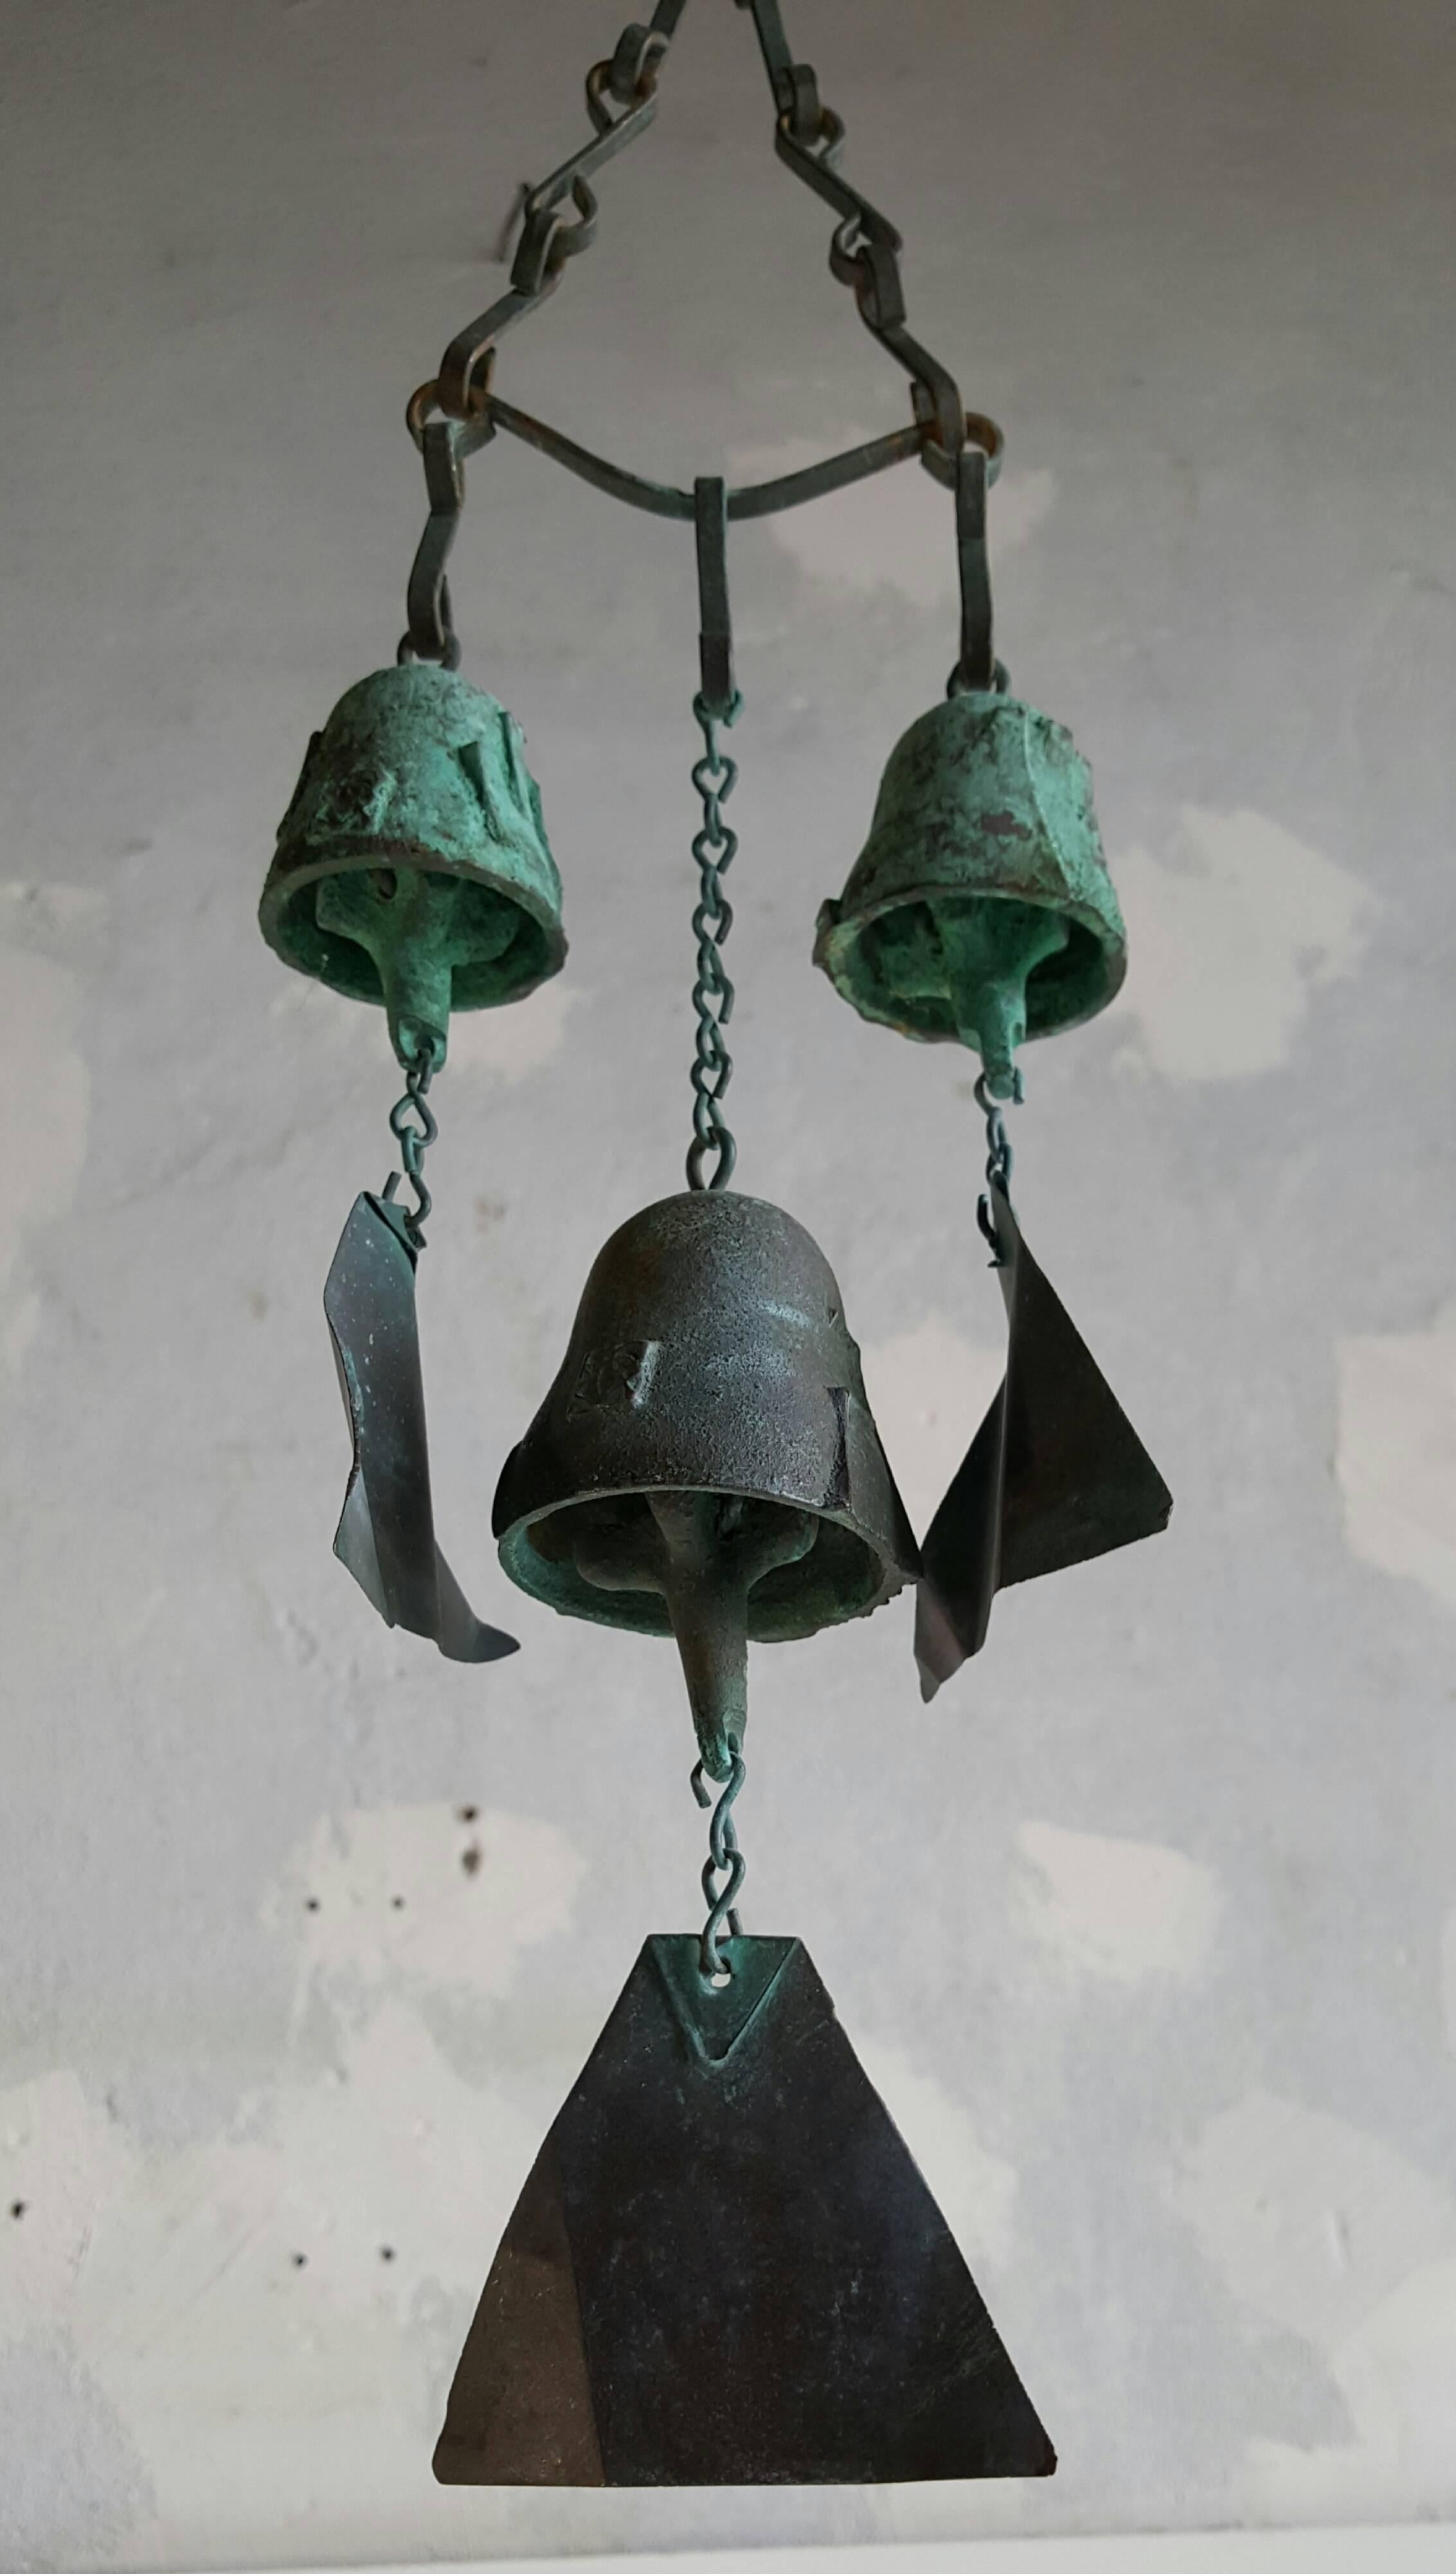 Paolo Soleri triple wind chime bells, solid cast bronze, heavily patinated surface Signed with Arcosanti square emblem Arizona, 1970s. Heavenly soothing sounds.